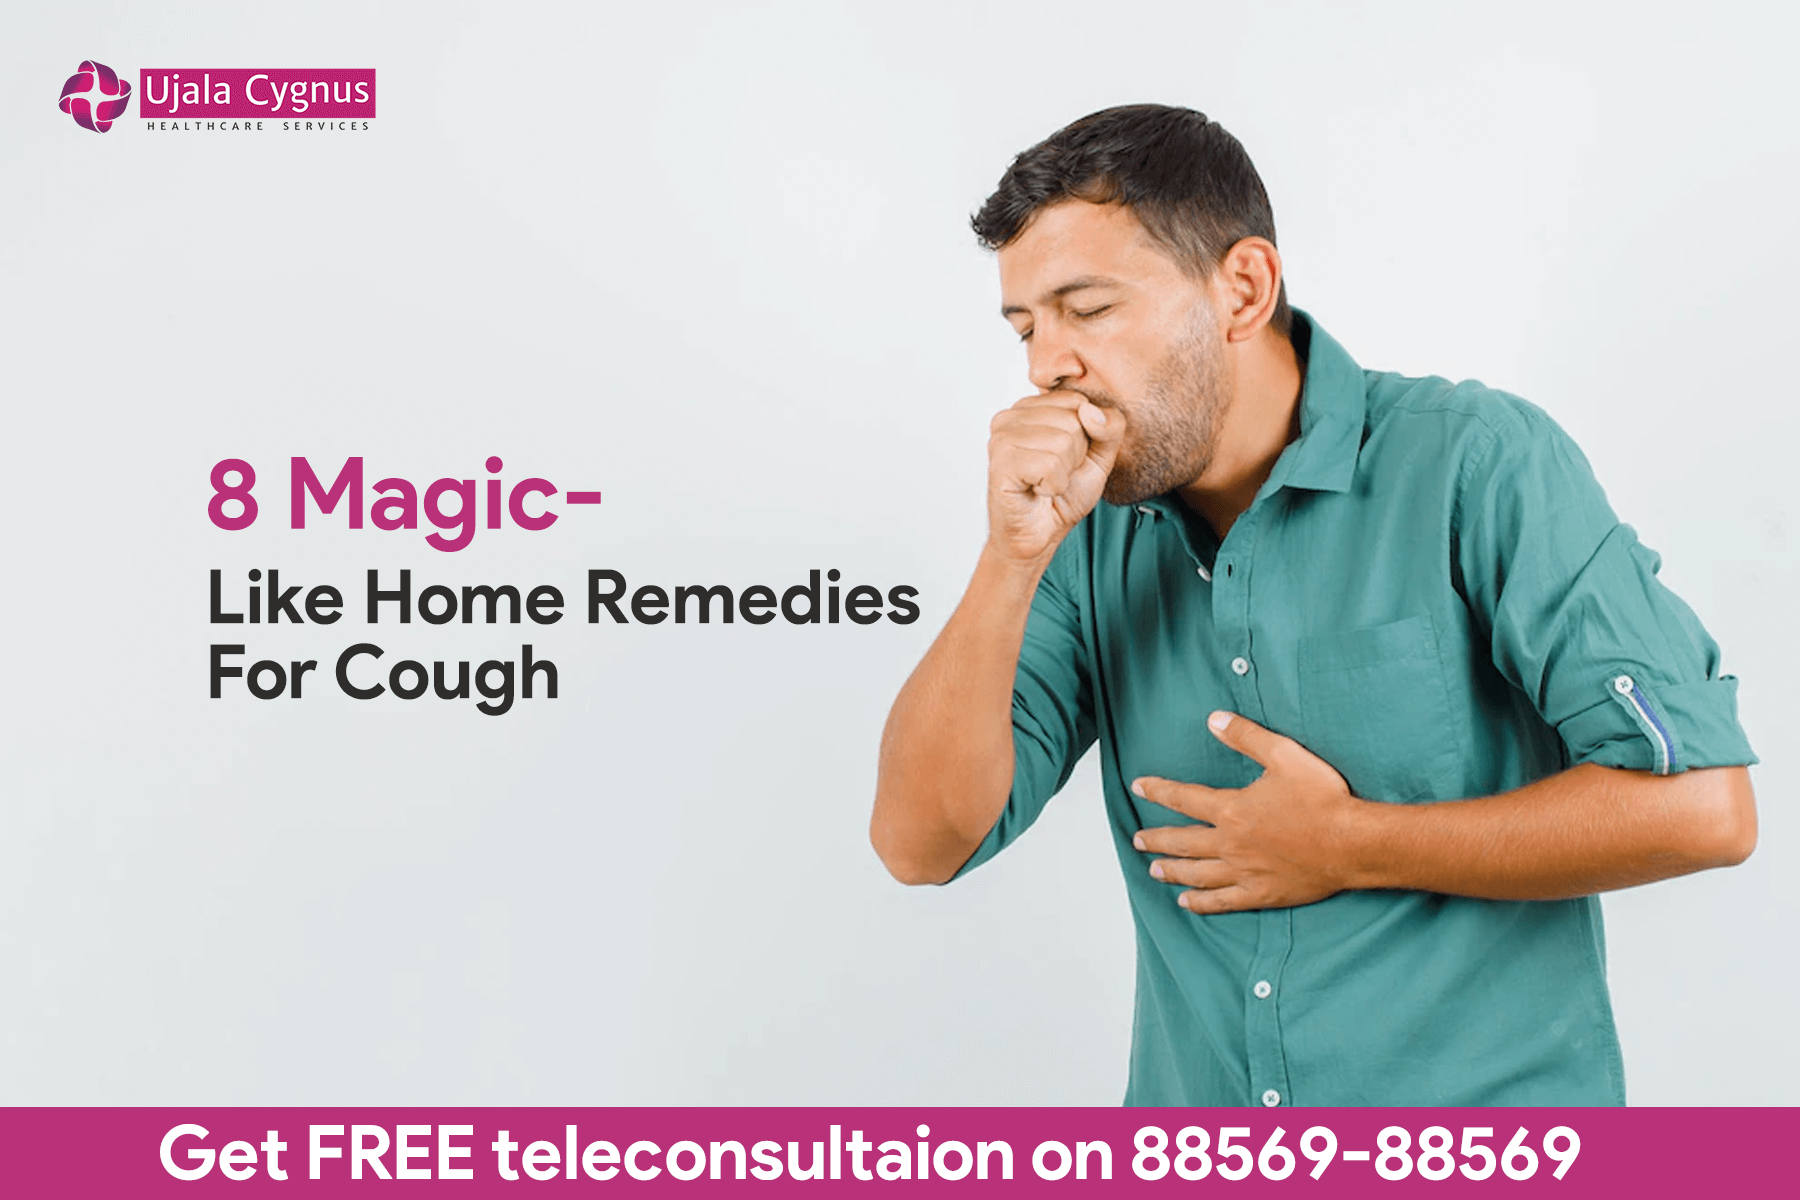 8 Magic-Like Home Remedies For Cough